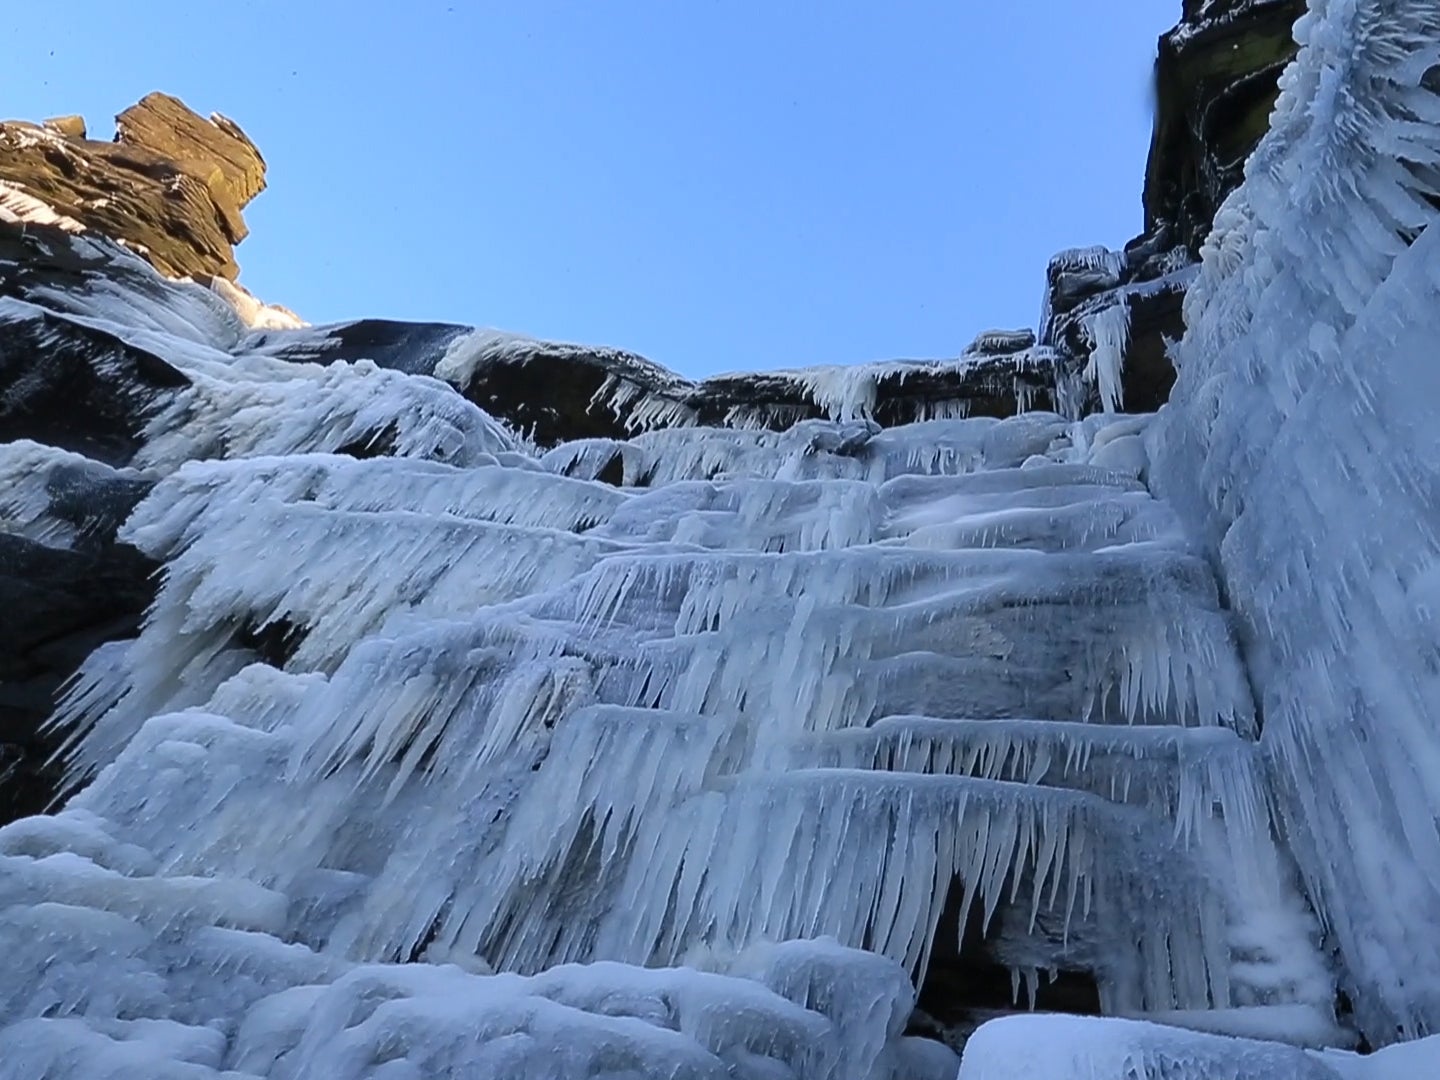 Video shows waterfall completely frozen over following days of cold weather in Derbyshire